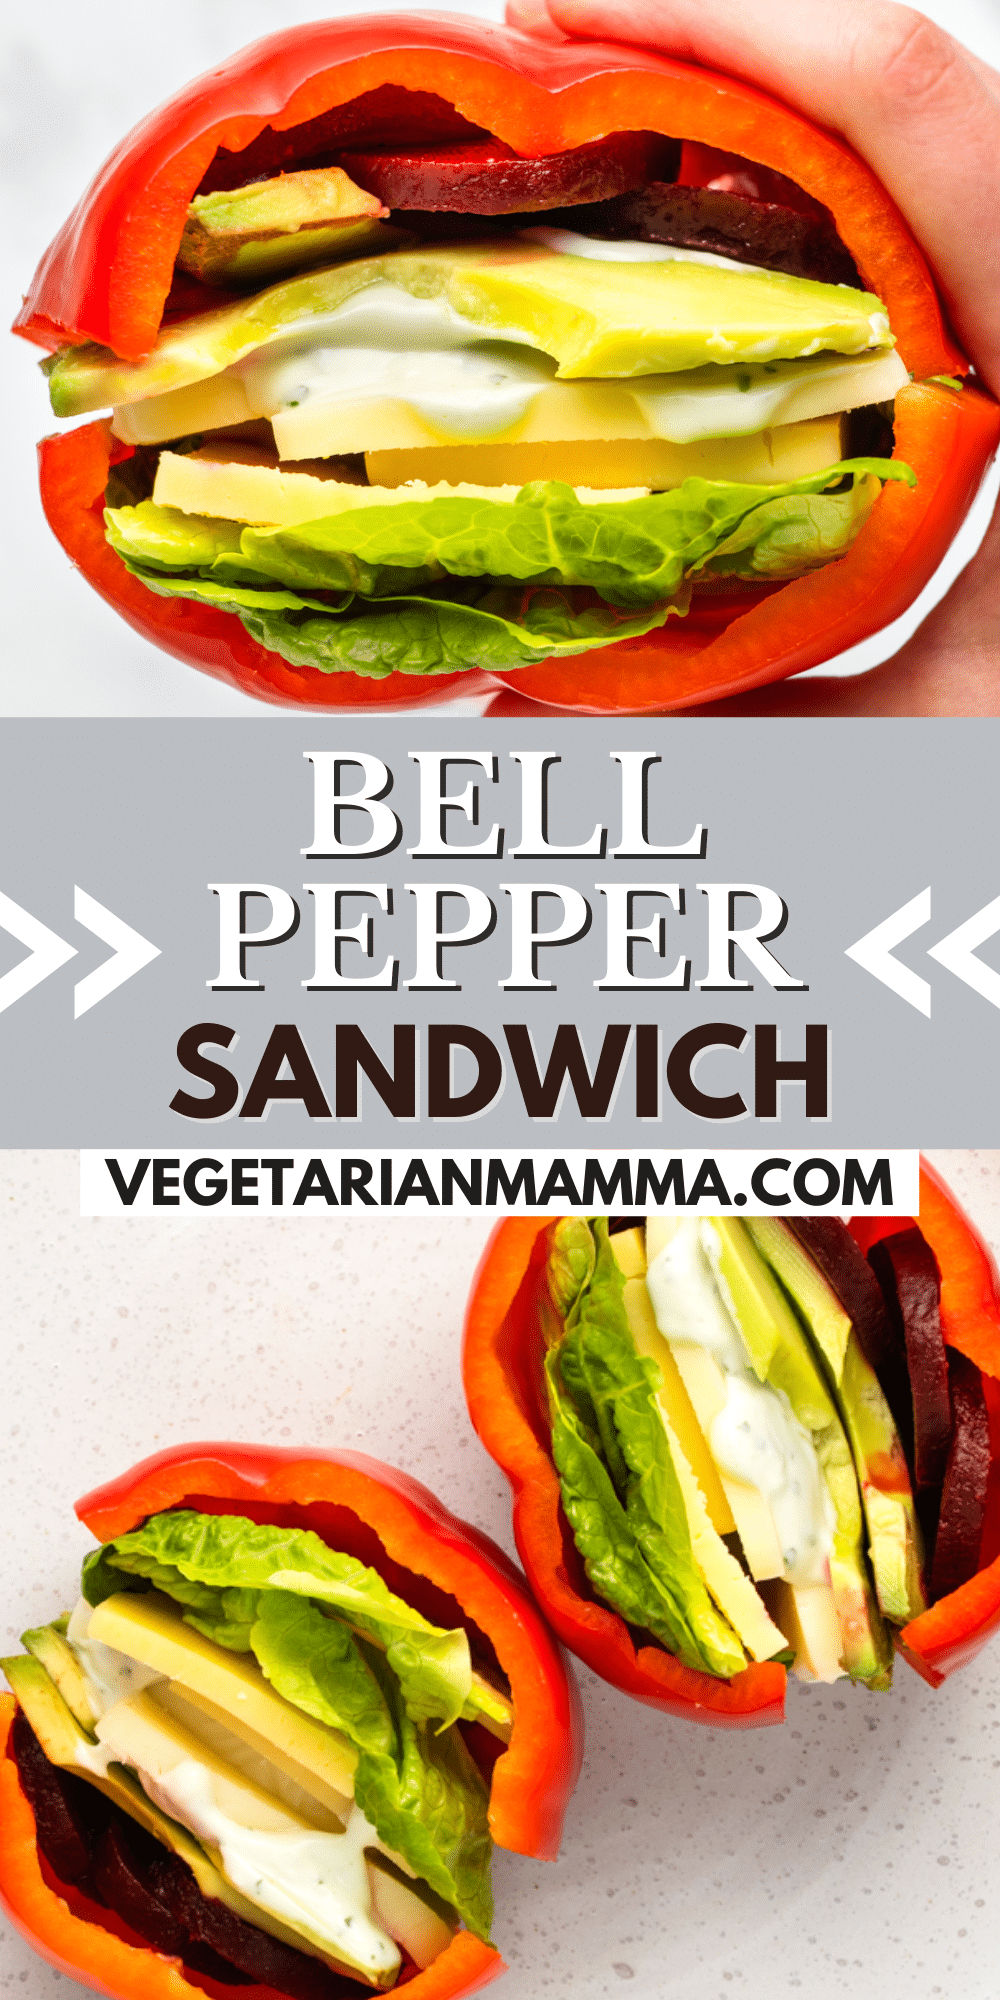 This Bell Pepper Sandwich is a quick and easy low-carb meal that is fun to eat. The Bell Pepper Sandwich was a hit on TikTok and will become a favorite in your kitchen. #bellpeppersandwich #peppersandwich #tiktokfood